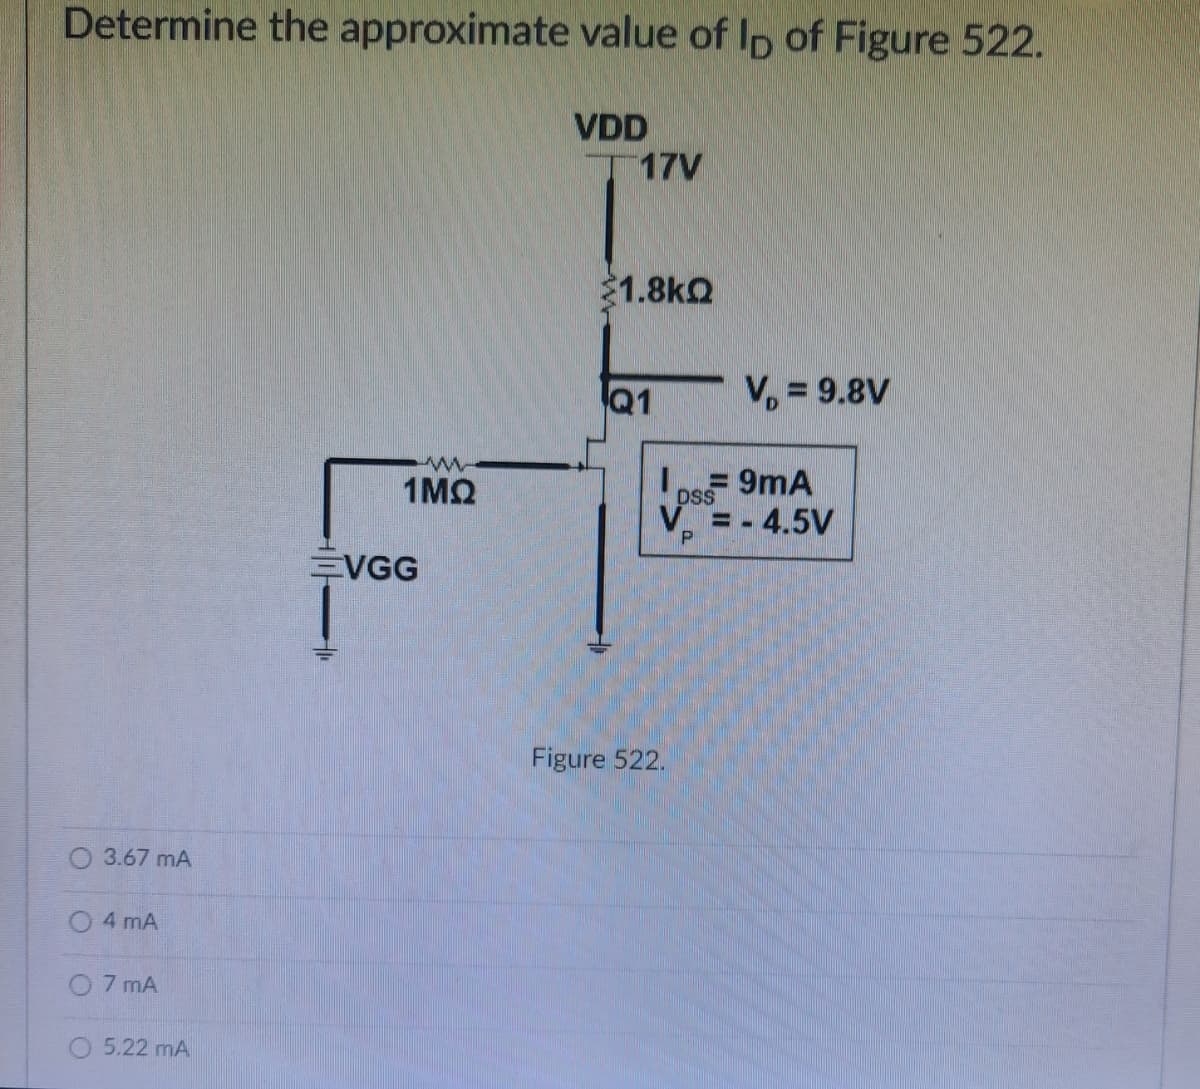 Determine the approximate value of lp of Figure 522.
VDD
17V
1.8kQ
V, = 9.8V
O 3.67 MA
4 mA
7 mA
5.22 mA
www
1MQ
VGG
Q1
= 9mA
DSS
V = -
P
Figure 522.
-4.5V